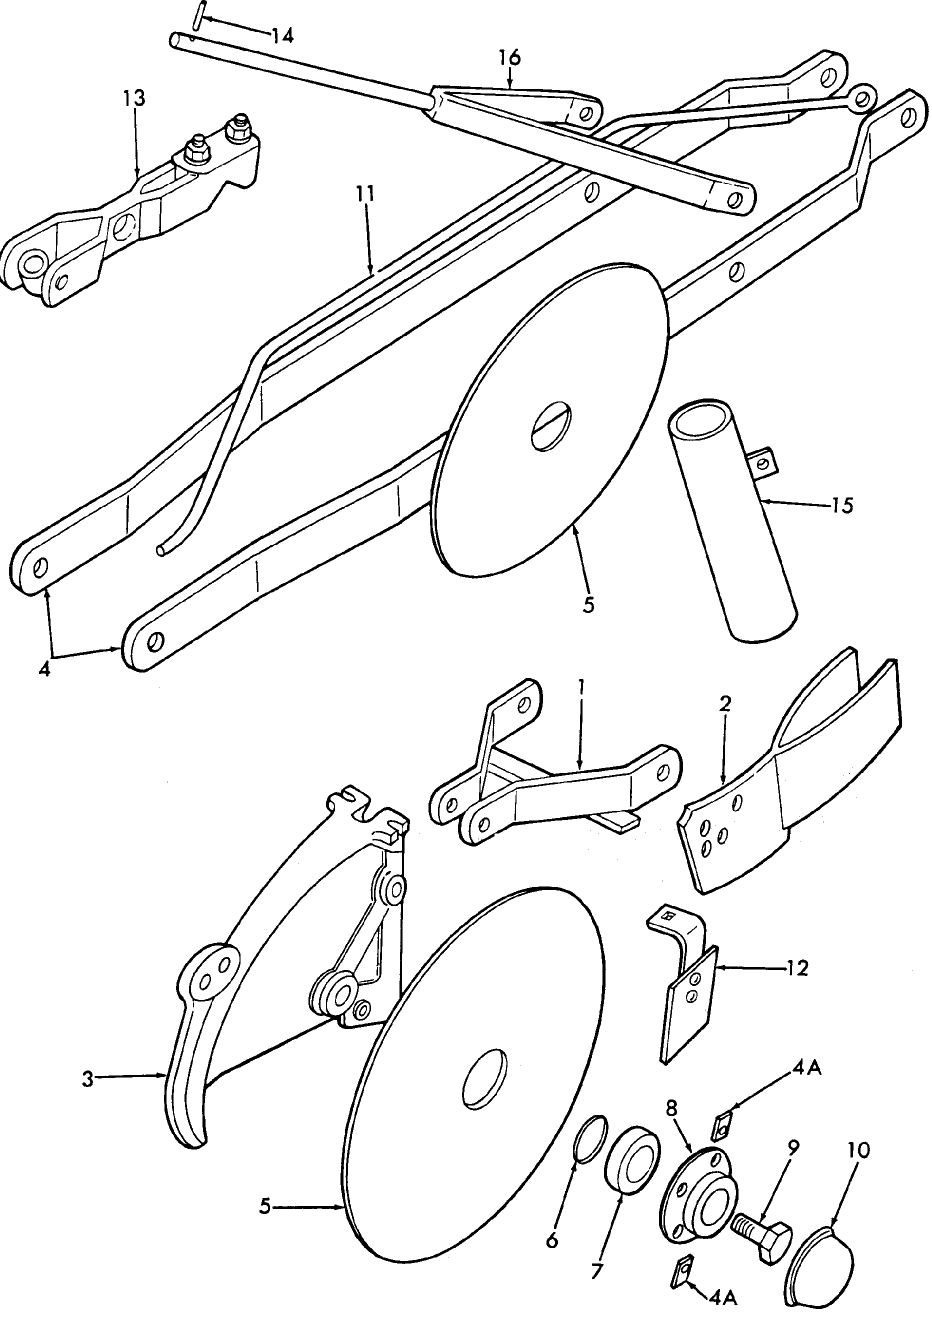 008 SUPPORT, RUNNER & DISC PARTS